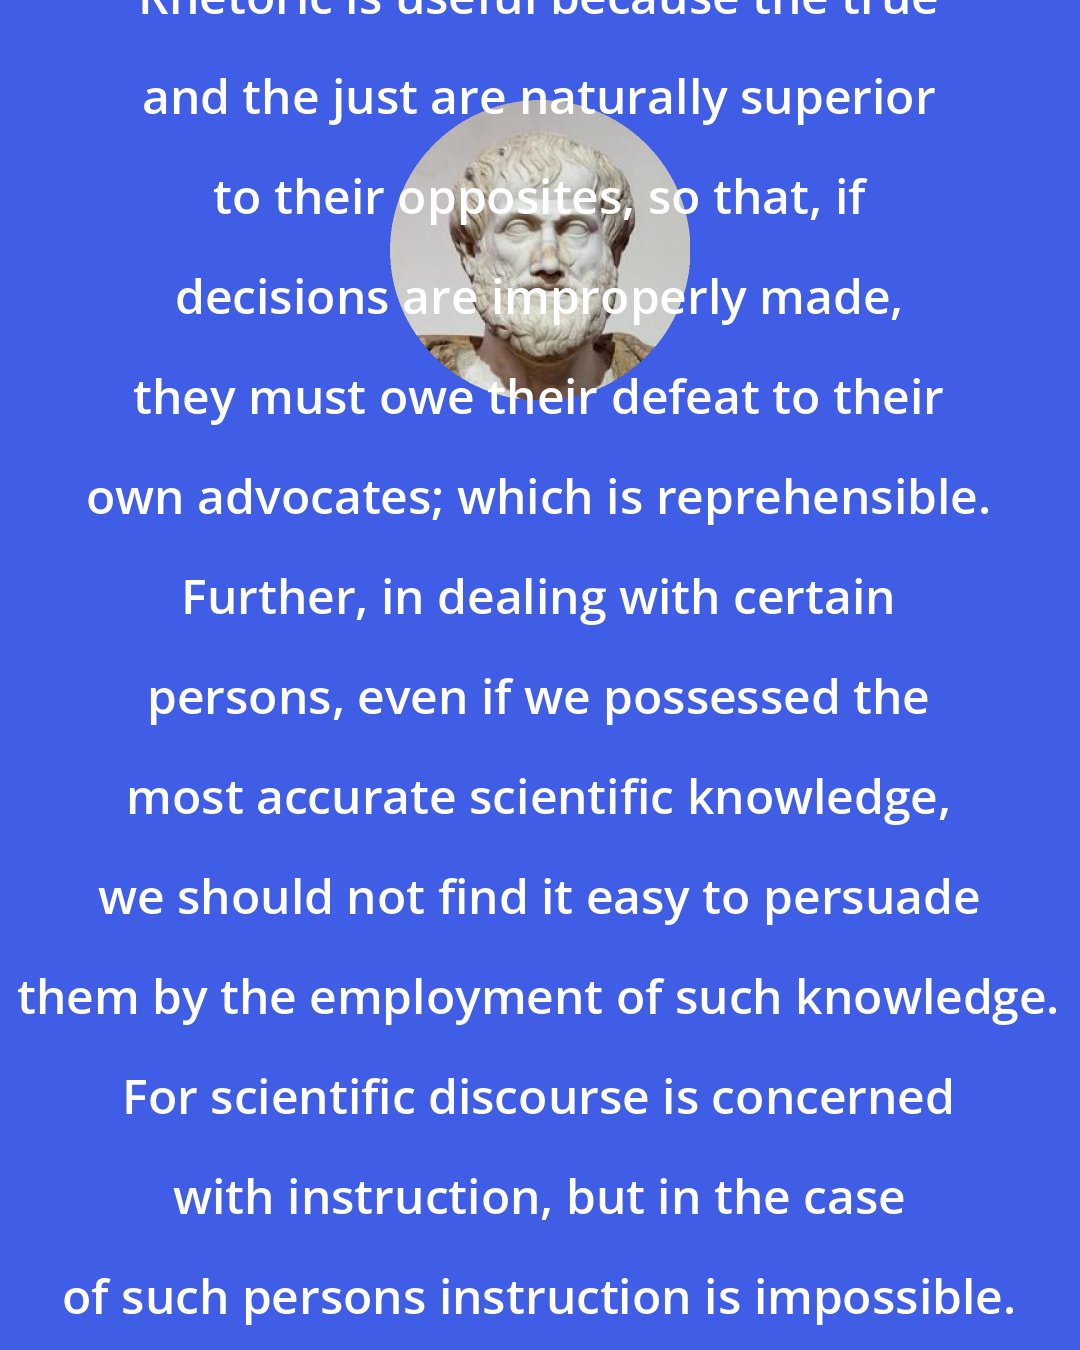 Aristotle: Rhetoric is useful because the true and the just are naturally superior to their opposites, so that, if decisions are improperly made, they must owe their defeat to their own advocates; which is reprehensible. Further, in dealing with certain persons, even if we possessed the most accurate scientific knowledge, we should not find it easy to persuade them by the employment of such knowledge. For scientific discourse is concerned with instruction, but in the case of such persons instruction is impossible.